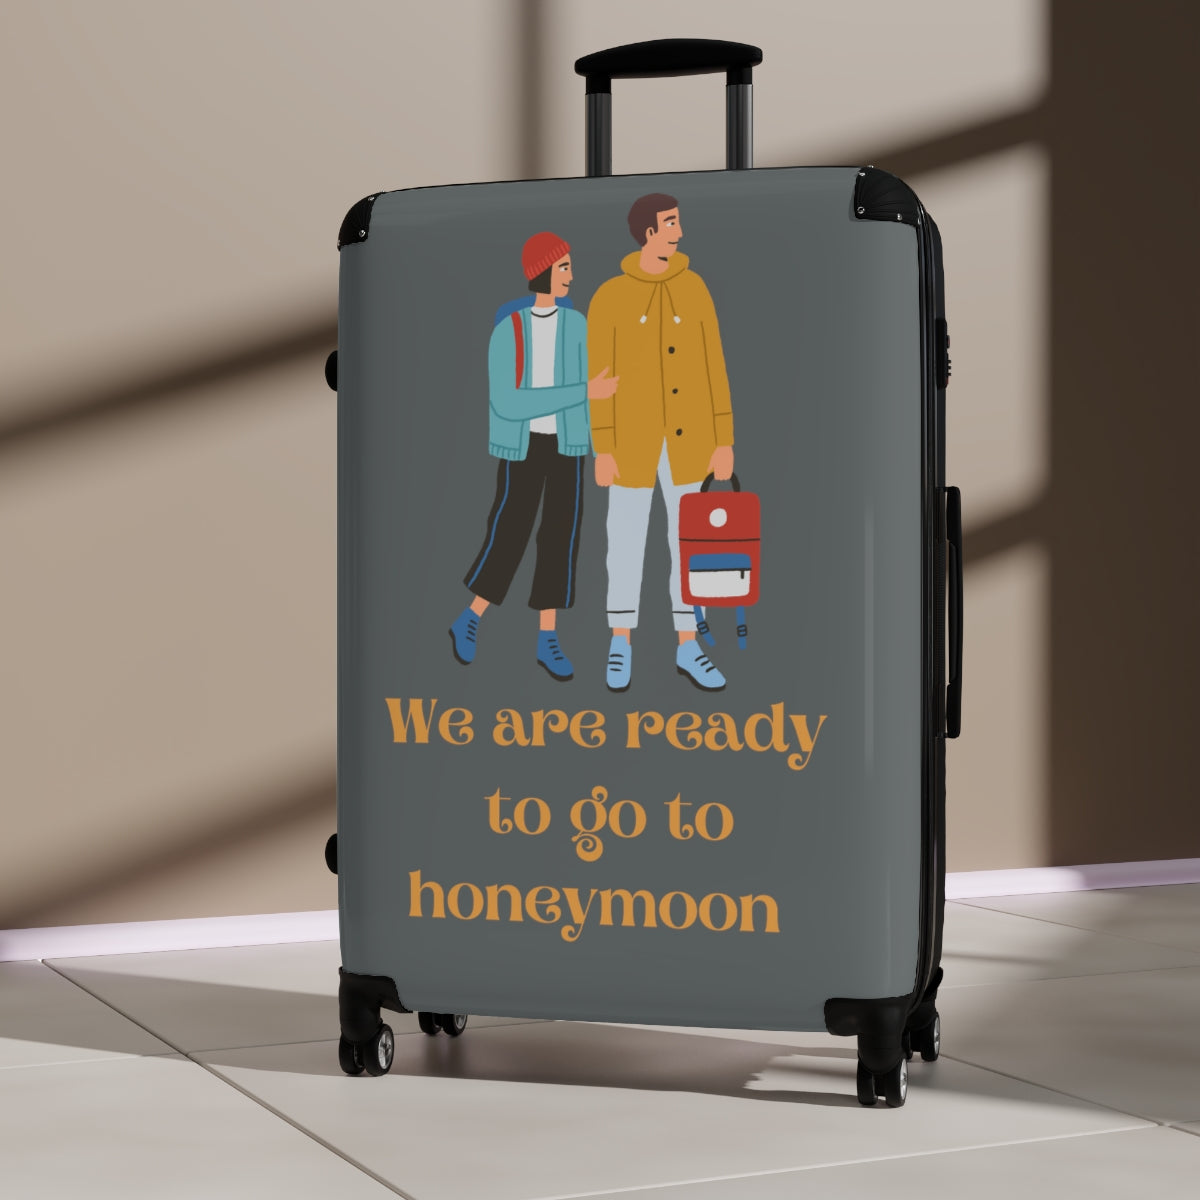 KIDS CARRY-ON SUITCASES, HEARTS, LUGGAGE BY ARTZIRA, ARTISTIC DESIGNS, DOUBLE WHEELED SPINNER